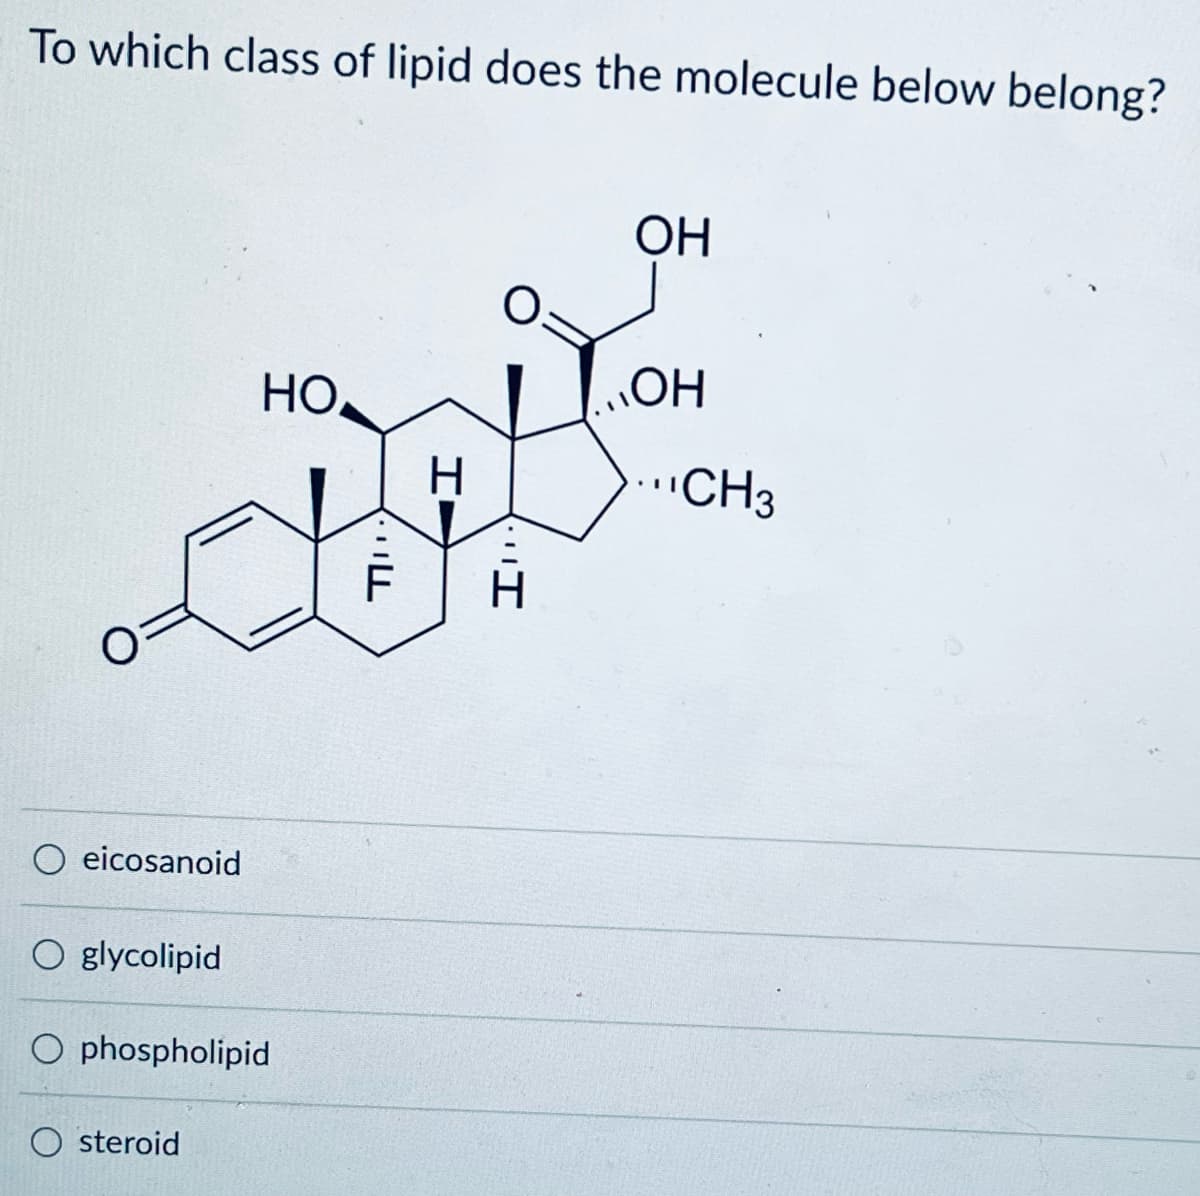 To which class of lipid does the molecule below belong?
OH
HO
OH
H
...CH3
eicosanoid
O glycolipid
O phospholipid
Osteroid